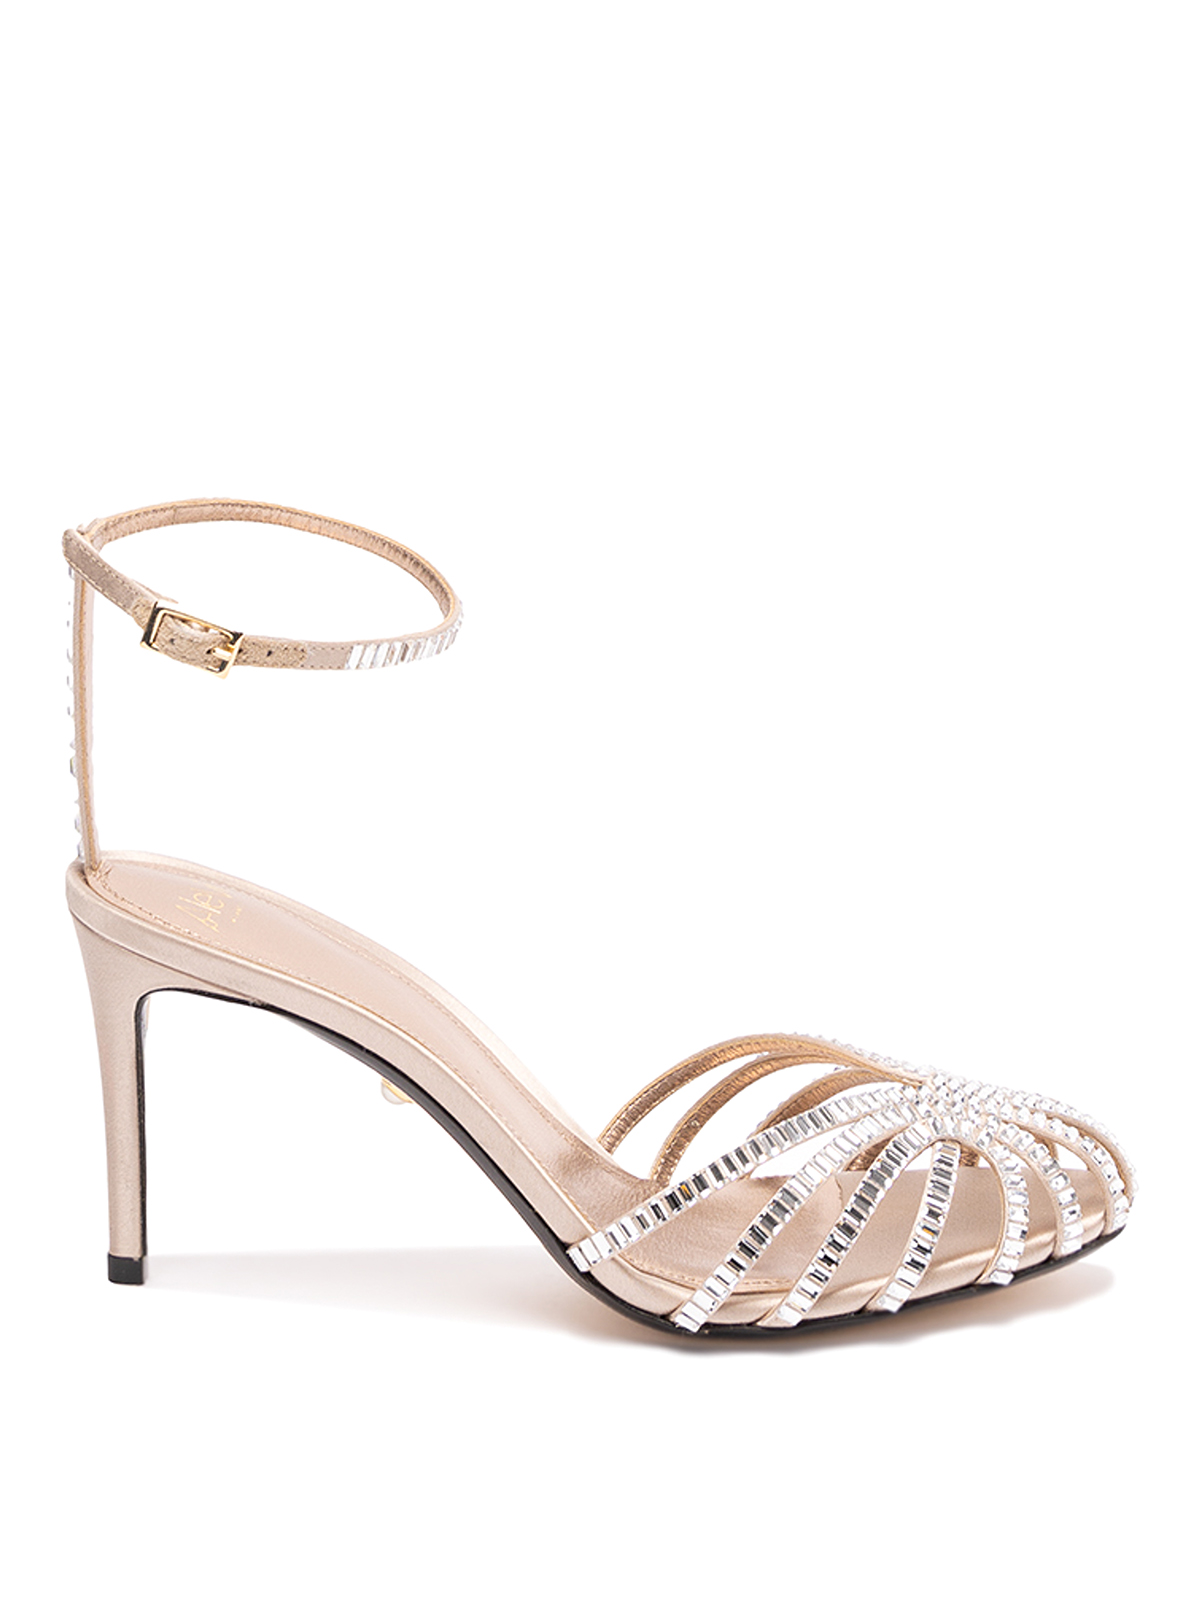 Alevì Milano Penelope Sandals With Crystals And Strap In Light Pink